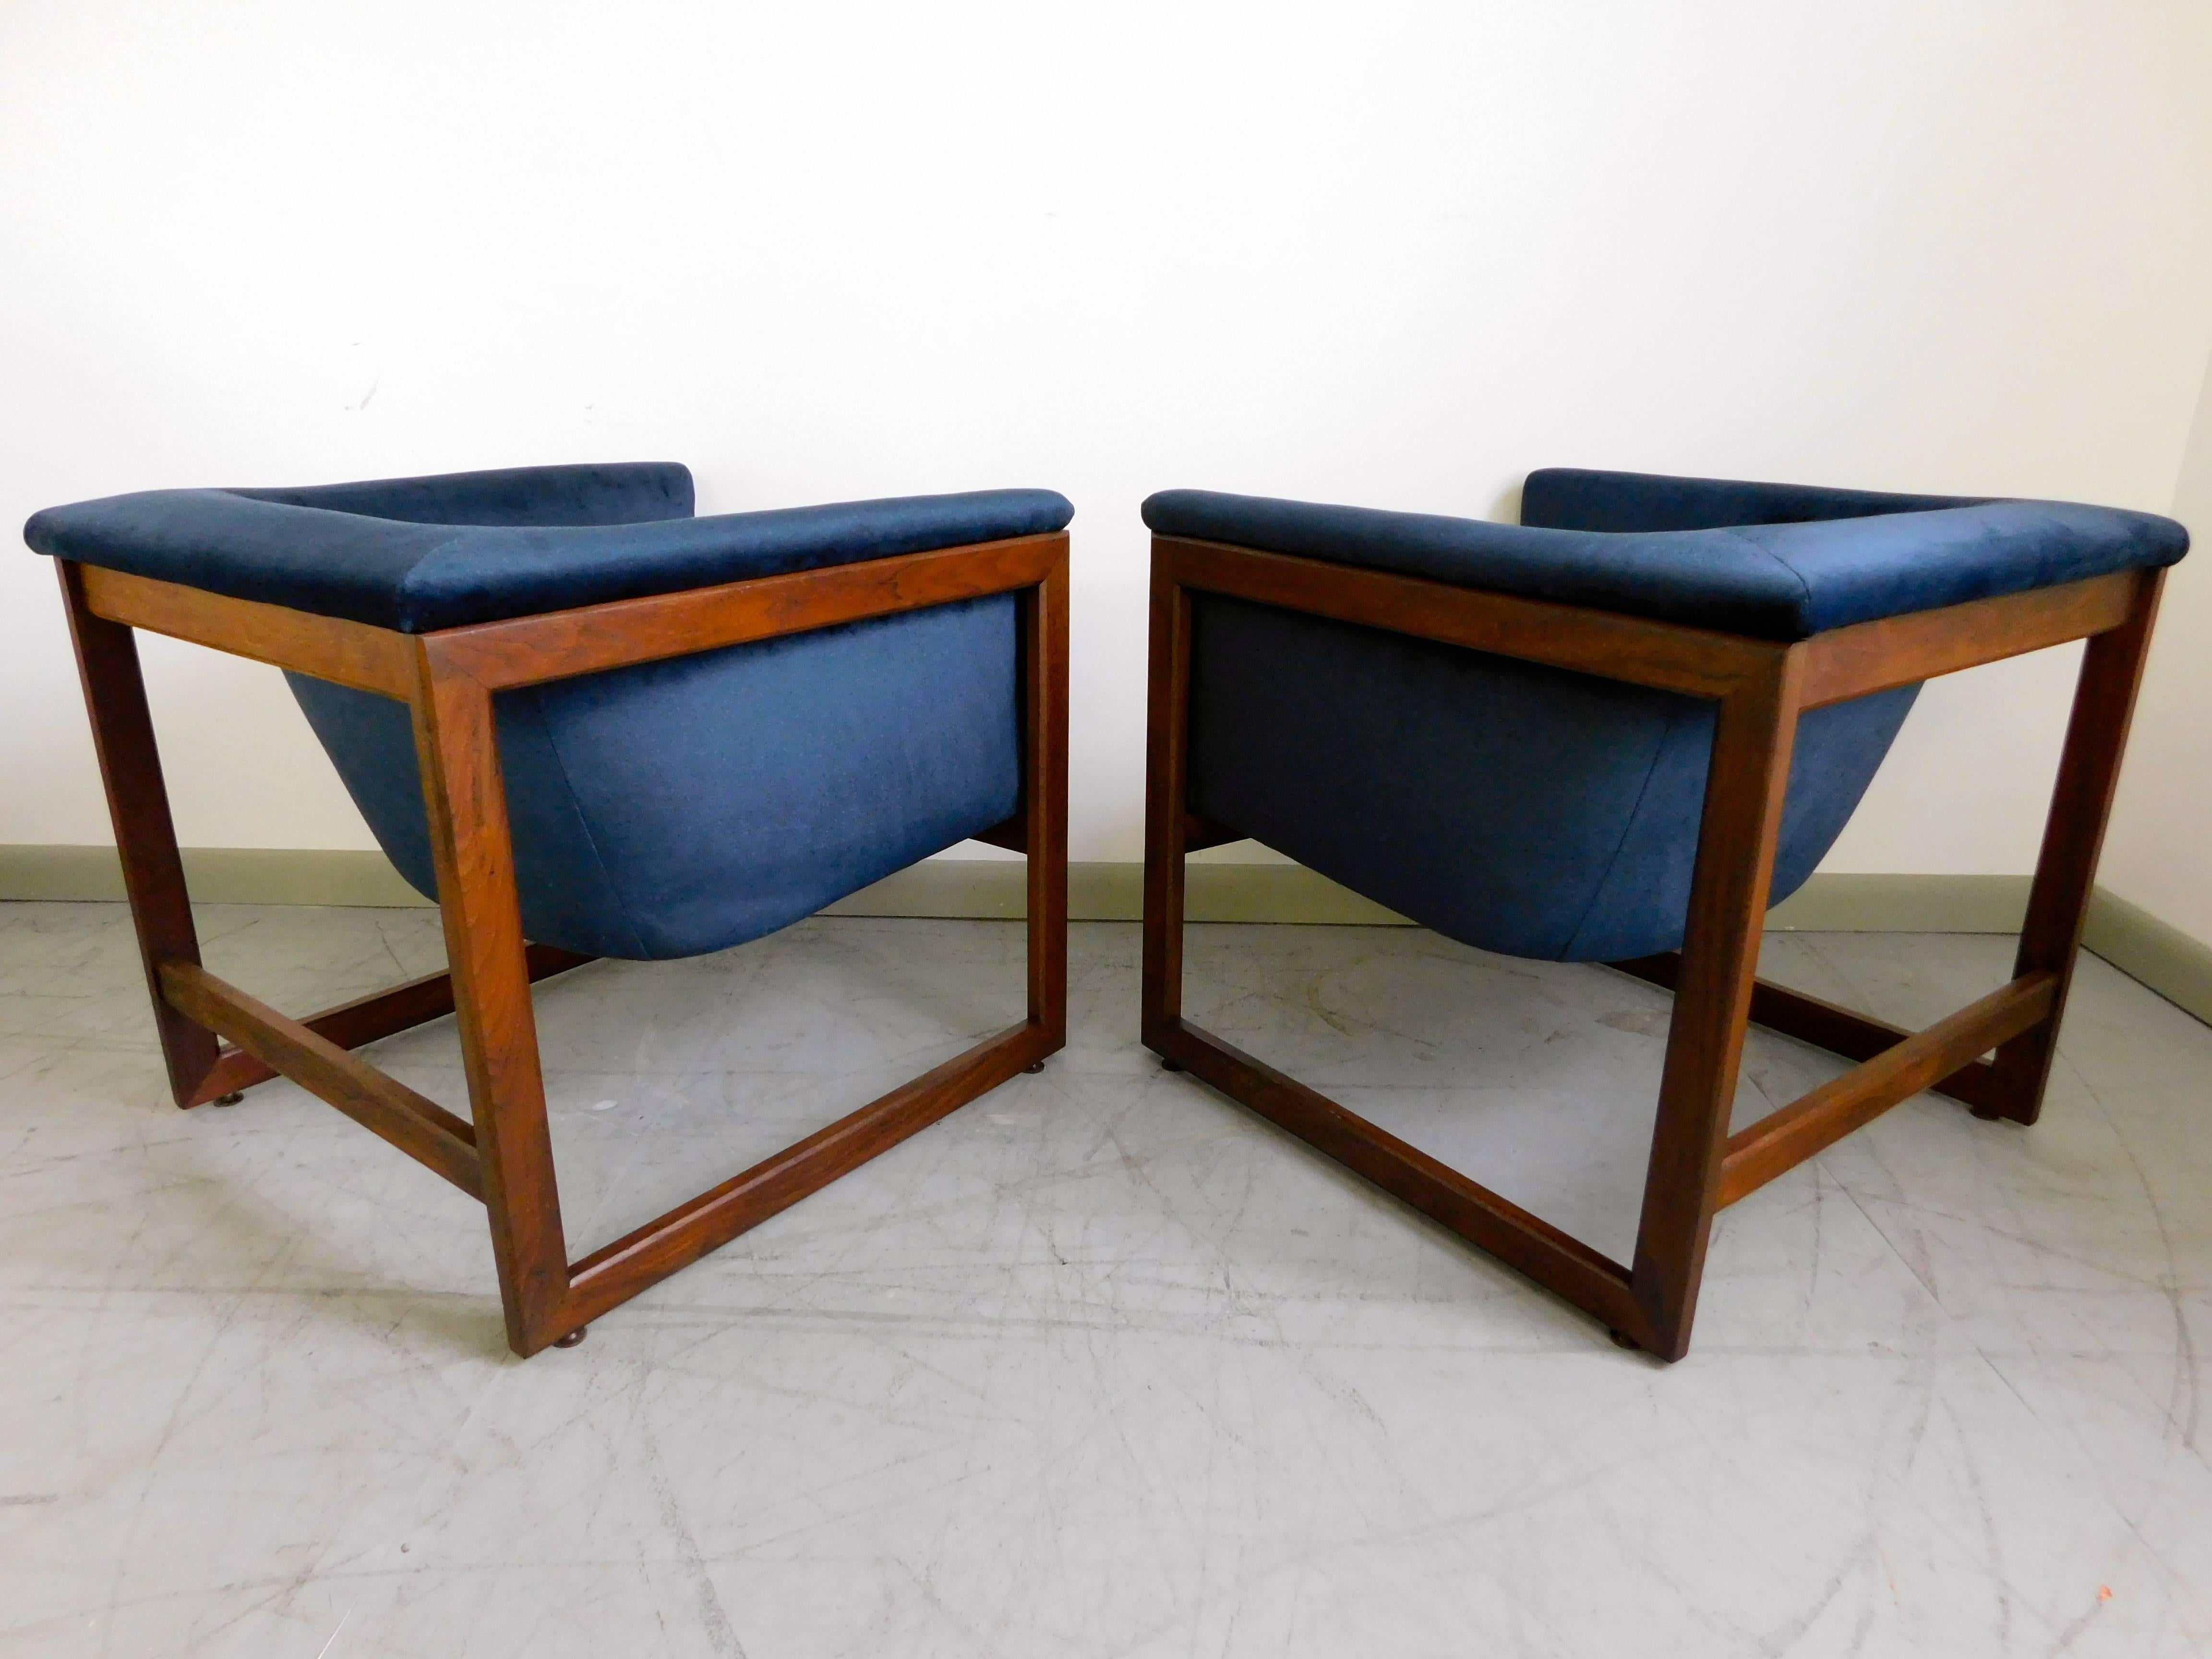 American Pair of Floating Cube Chairs by Milo Baughman